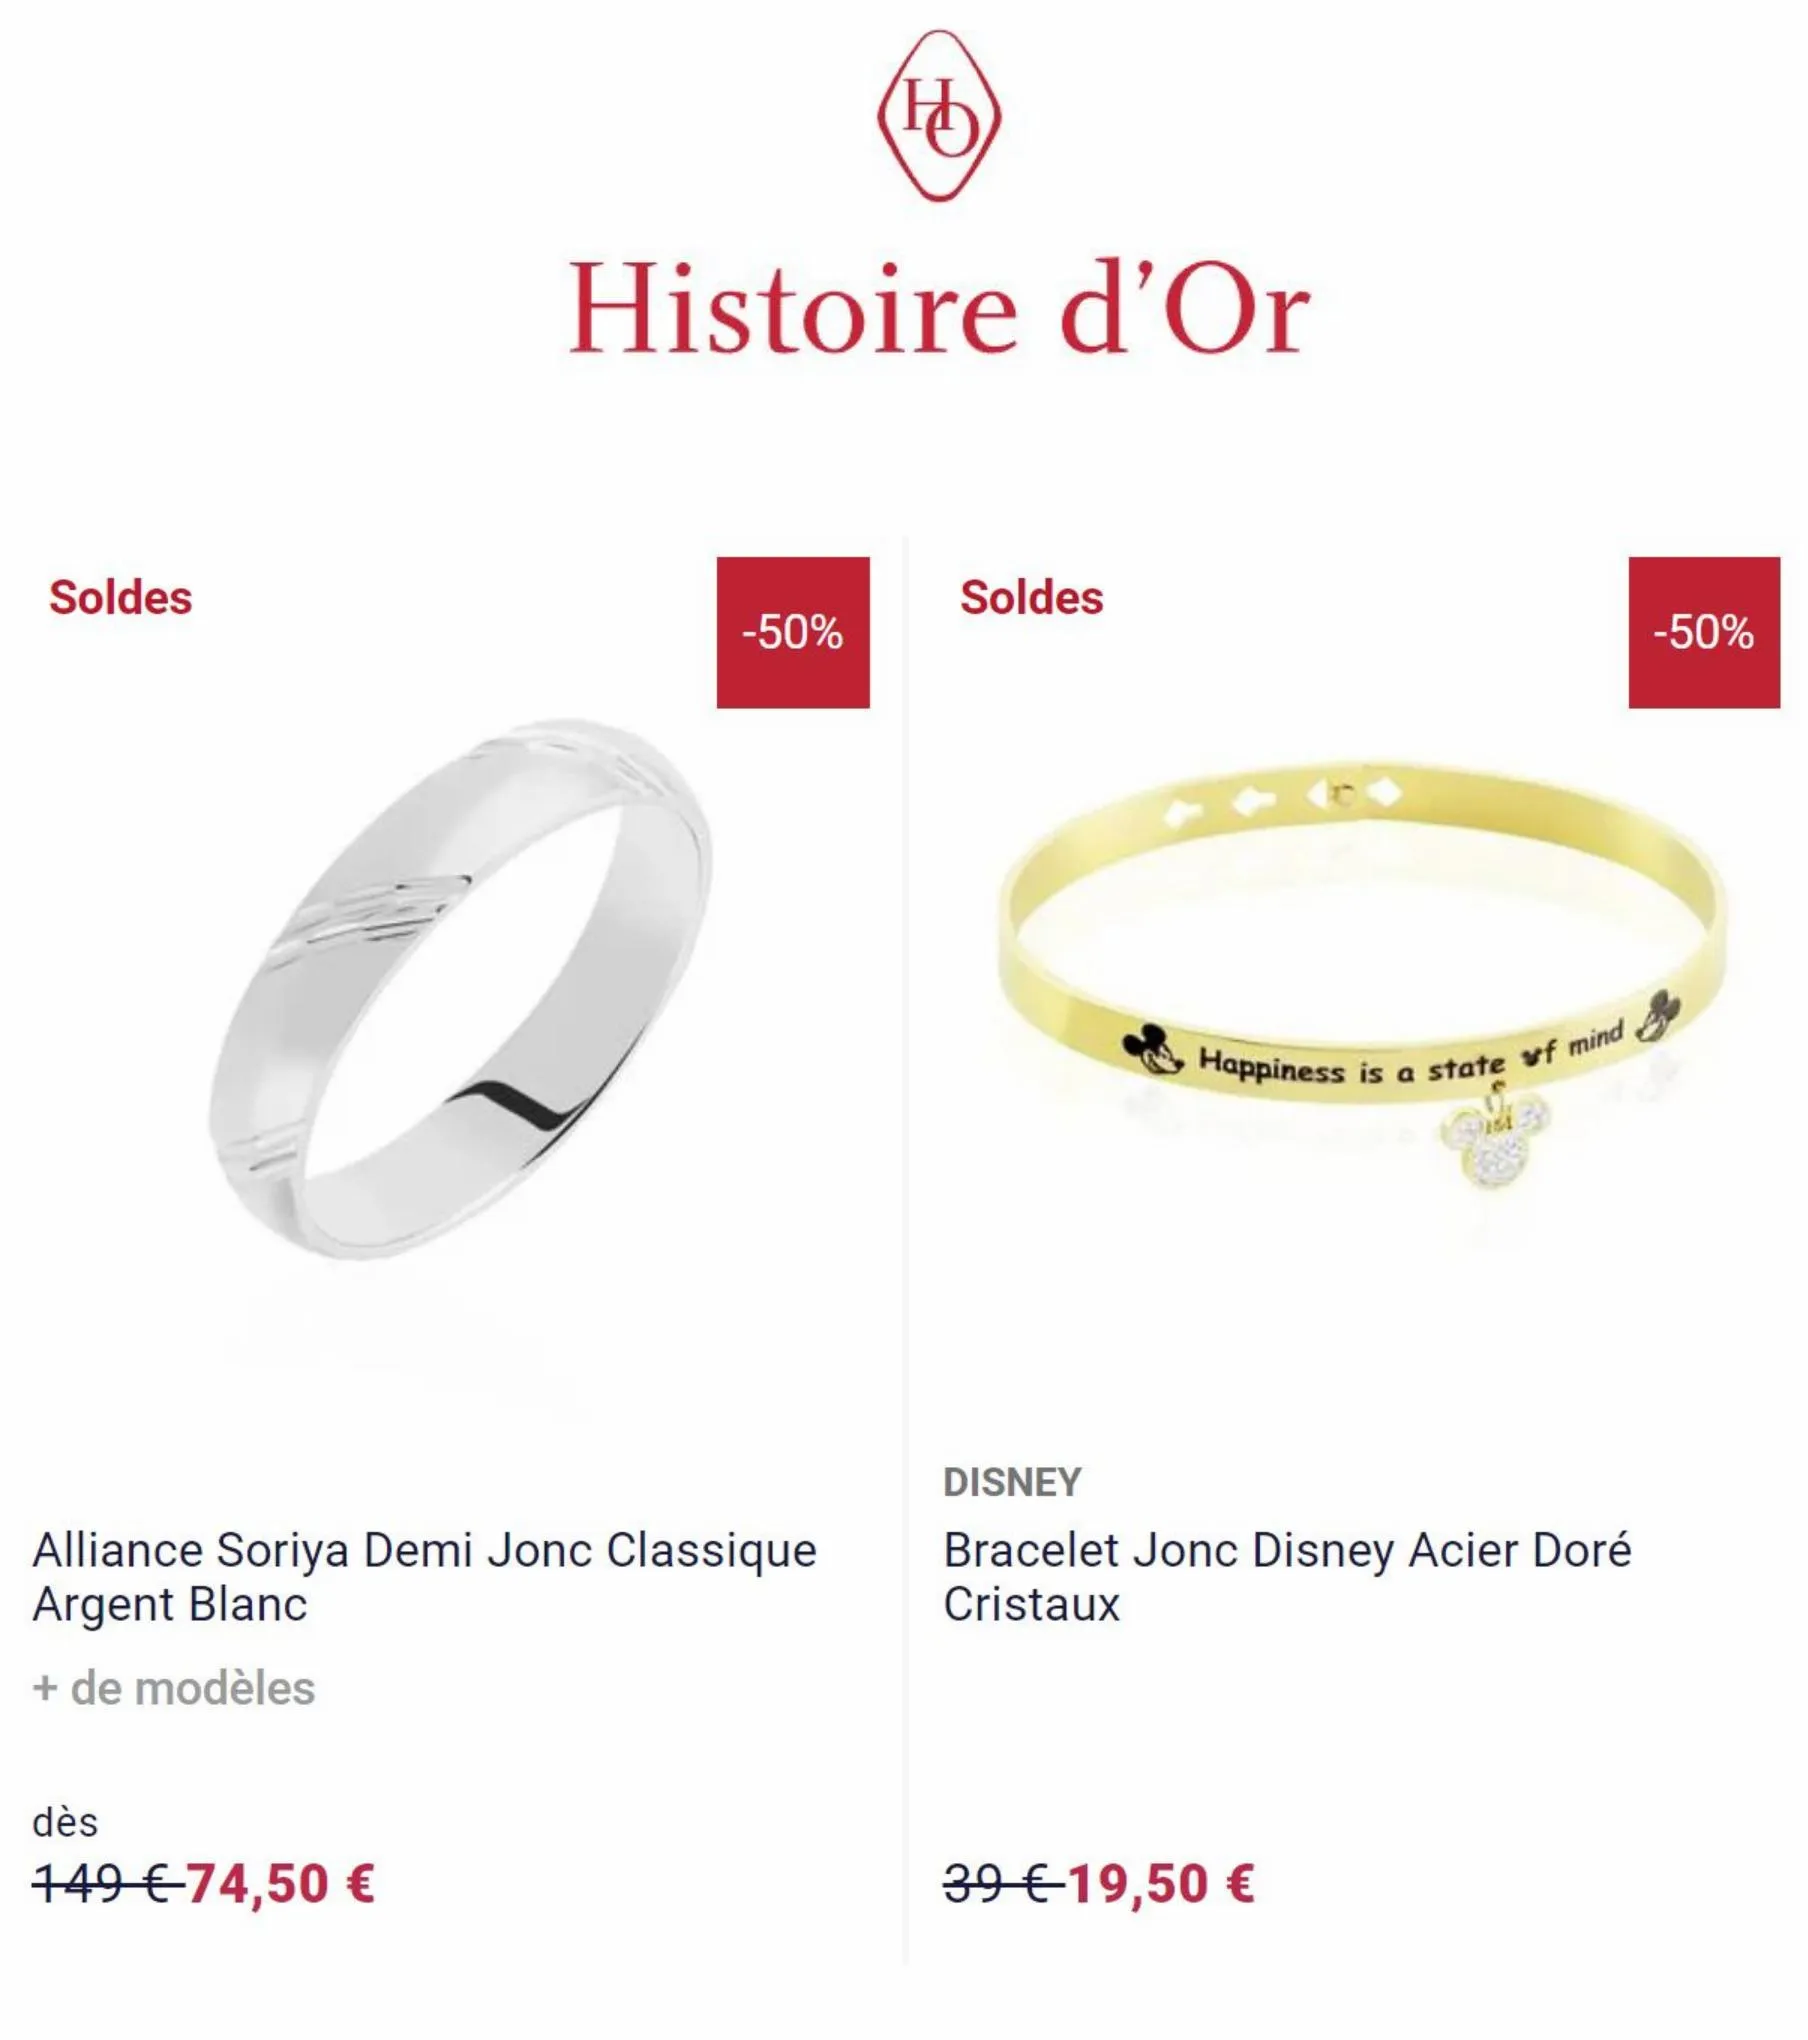 Catalogue Soldes Histoire d'Or, page 00002